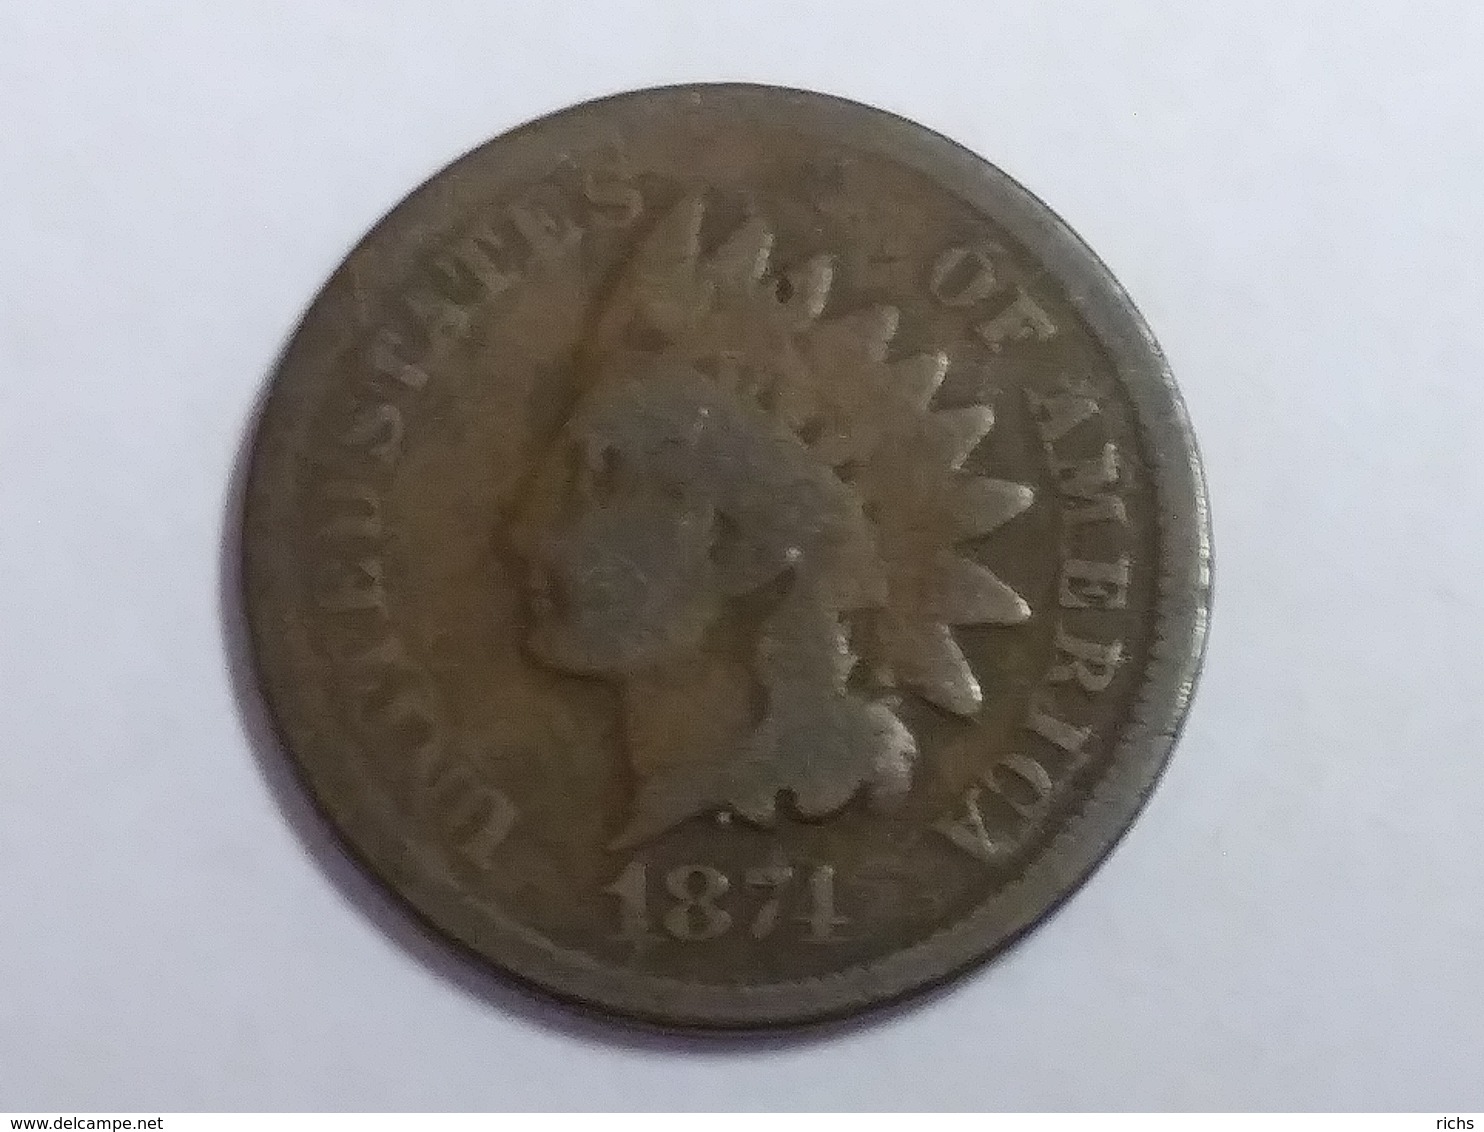 1874 Indian Head Cent - 1859-1909: Indian Head